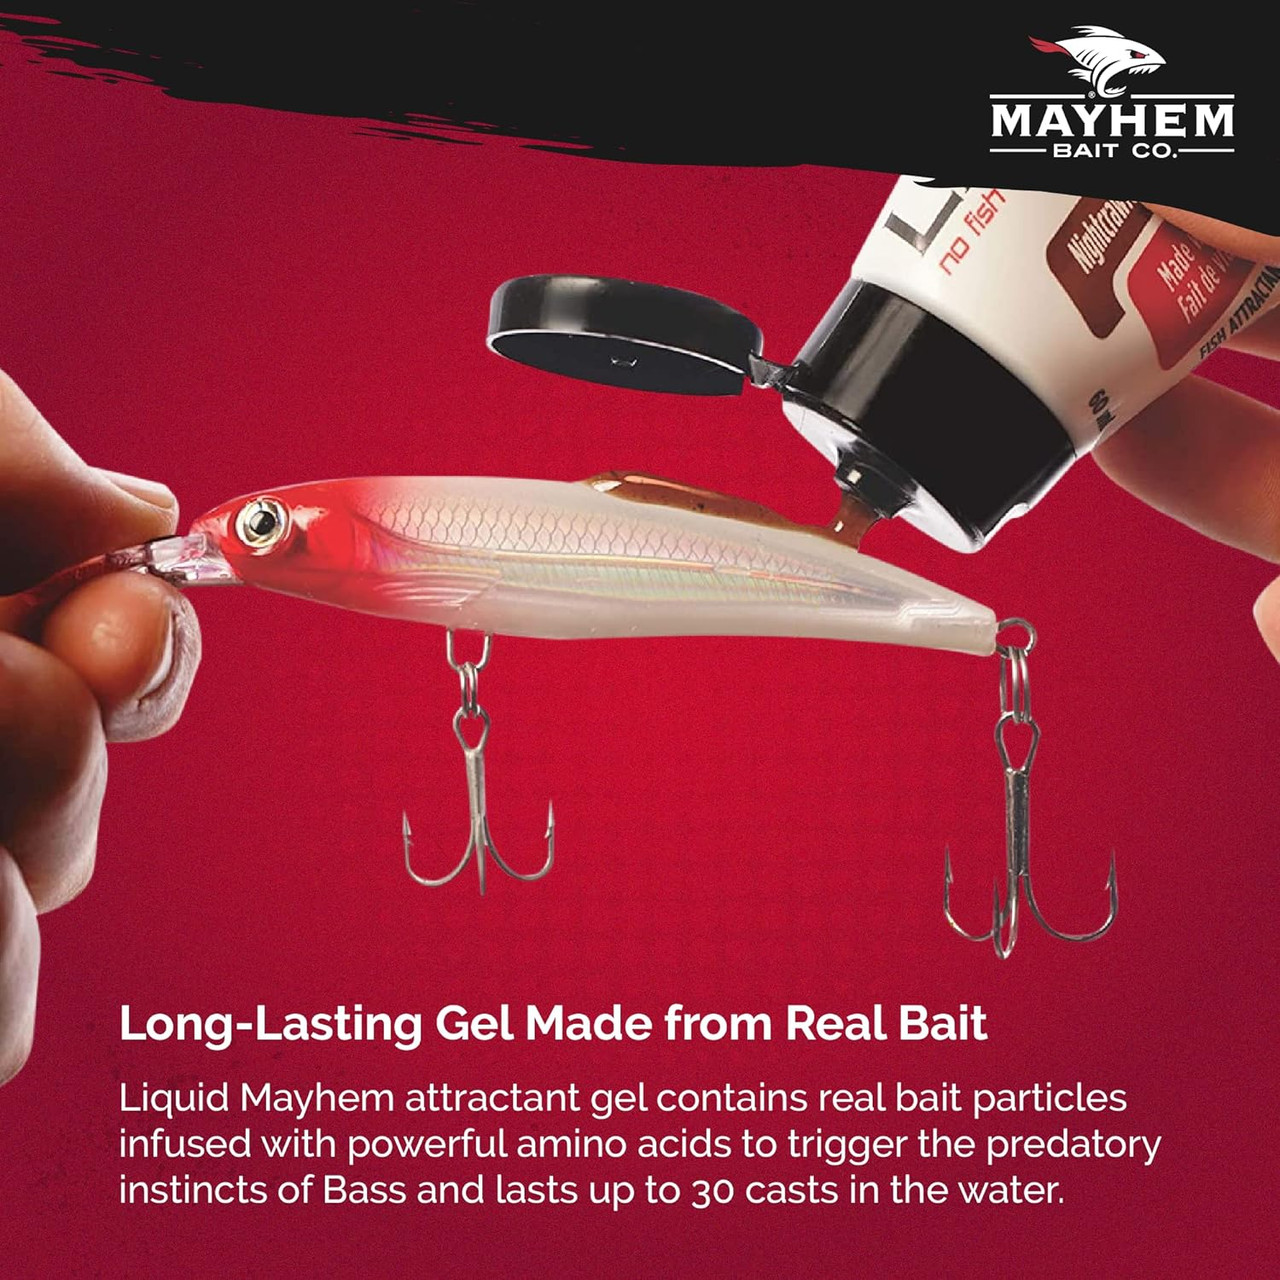 Mayhem Bait Co. Inc, is a company that is passionate about results,
Our soft plastic baits are designed and field tested in collaboration
with our pro staff to assure that they are the most effective styles,
actions and colors for bass and that they meet the demands of real
fishermen and women.
From stickbaits to crawfish to minnows, our soft plastics set the
standard in bass fishing, with the stamp of approval from real pros.
We know that the success of our business is entirely dependent
upon the experience that we provide for our customers. With that
in mind, Mayhem Bait Co. is committed to delivering a product that
exceeds your expectations and earns your trust.